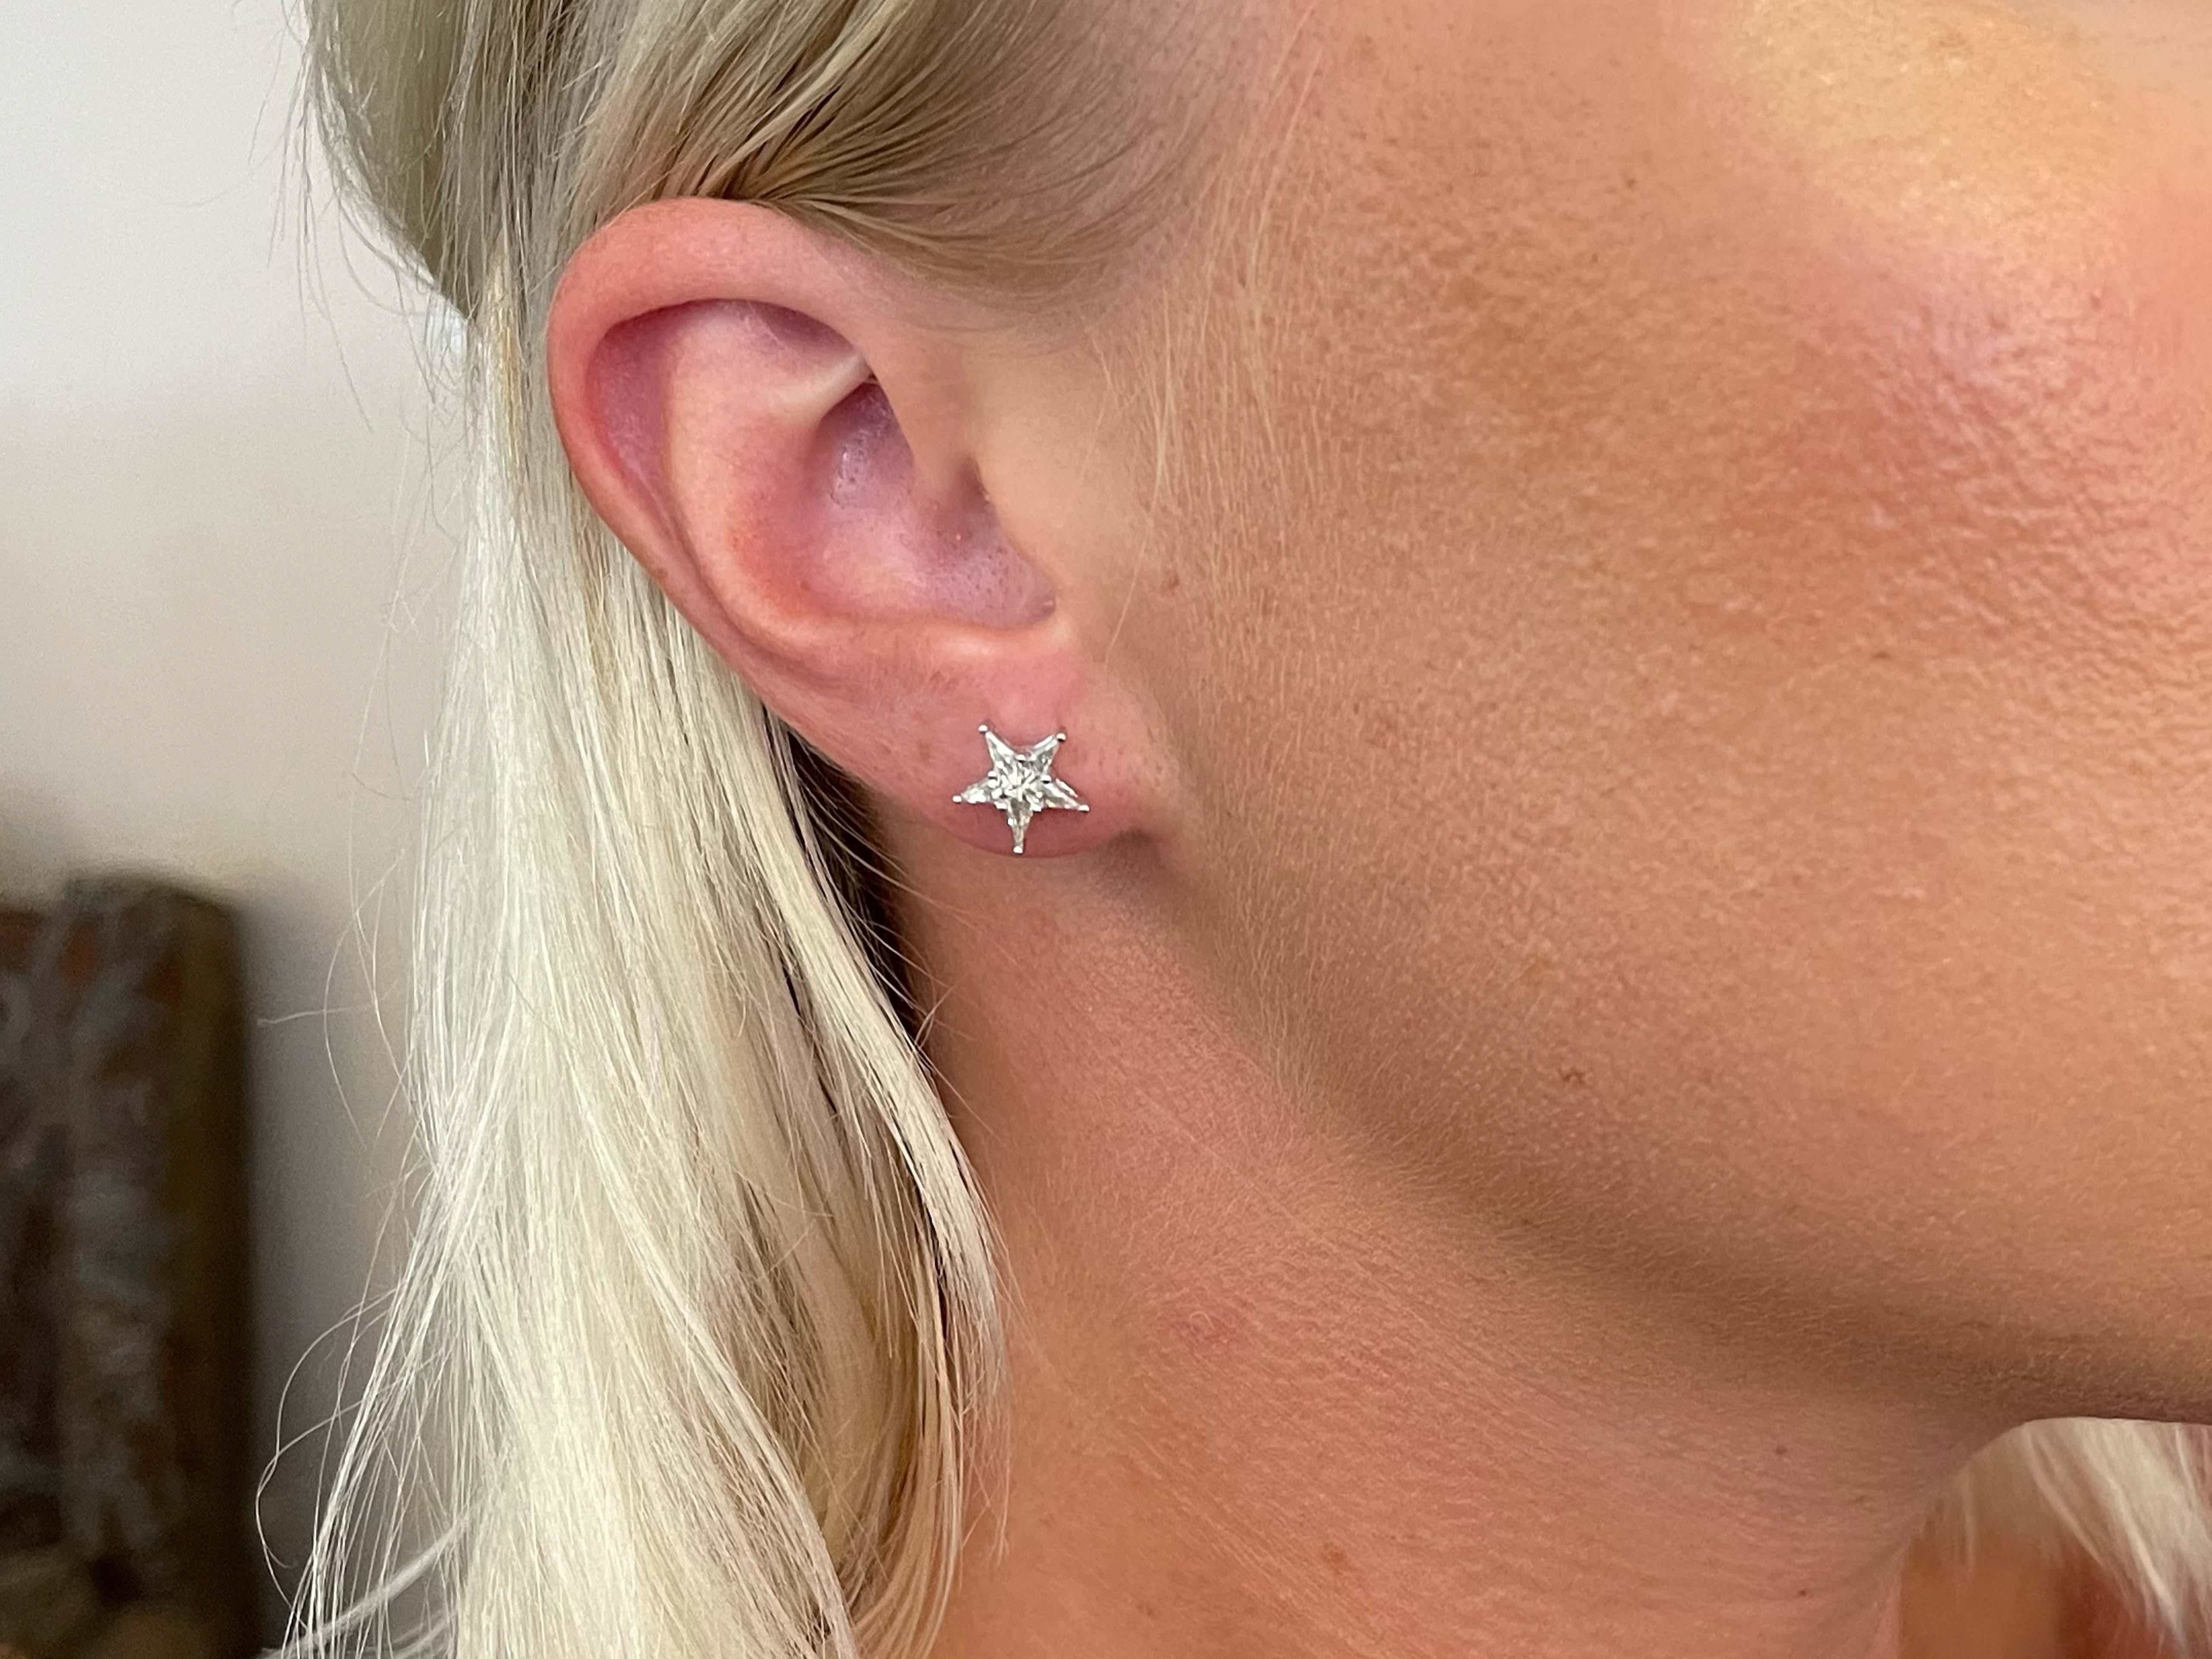 These gorgeous earrings each feature a star cut diamond prong set, with a total carat weight of 0.57 carats. The diamonds are G-H, VS and have beautiful sparkle. The earrings measure 10 mm in diameter. These earrings are beautifully crafted in white